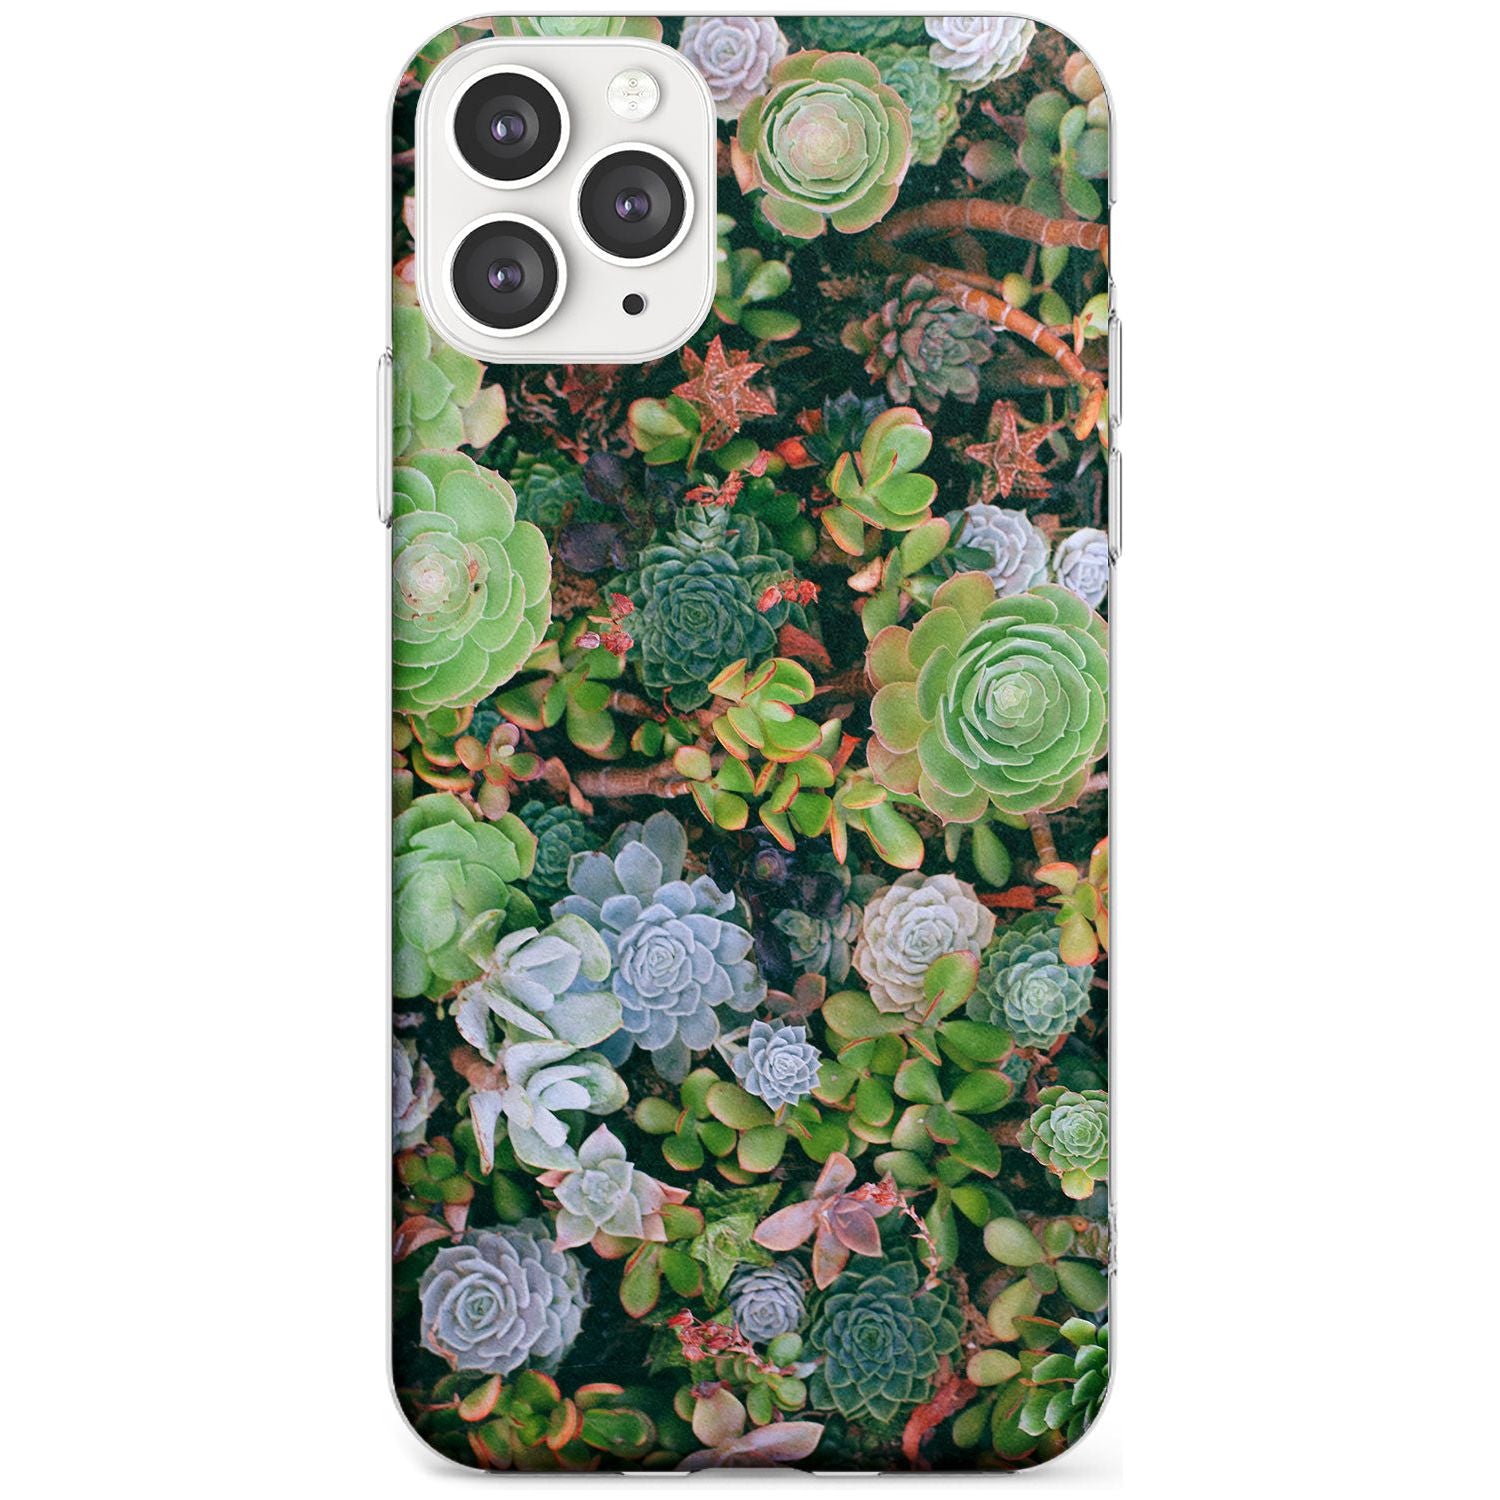 Colourful Succulents Photograph Slim TPU Phone Case for iPhone 11 Pro Max